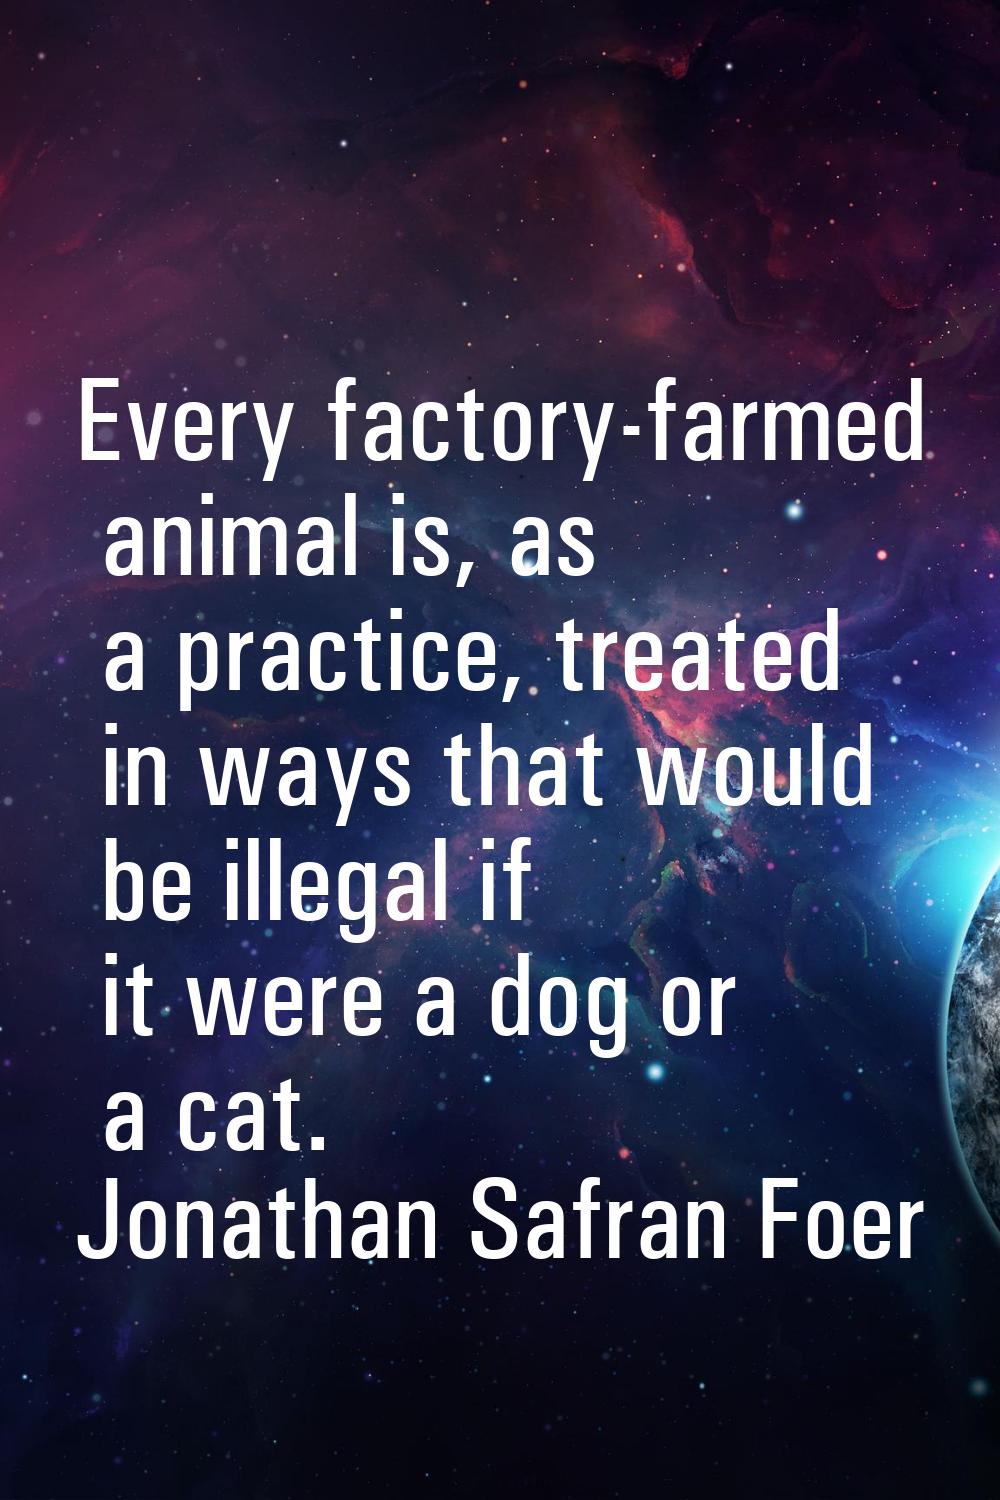 Every factory-farmed animal is, as a practice, treated in ways that would be illegal if it were a d